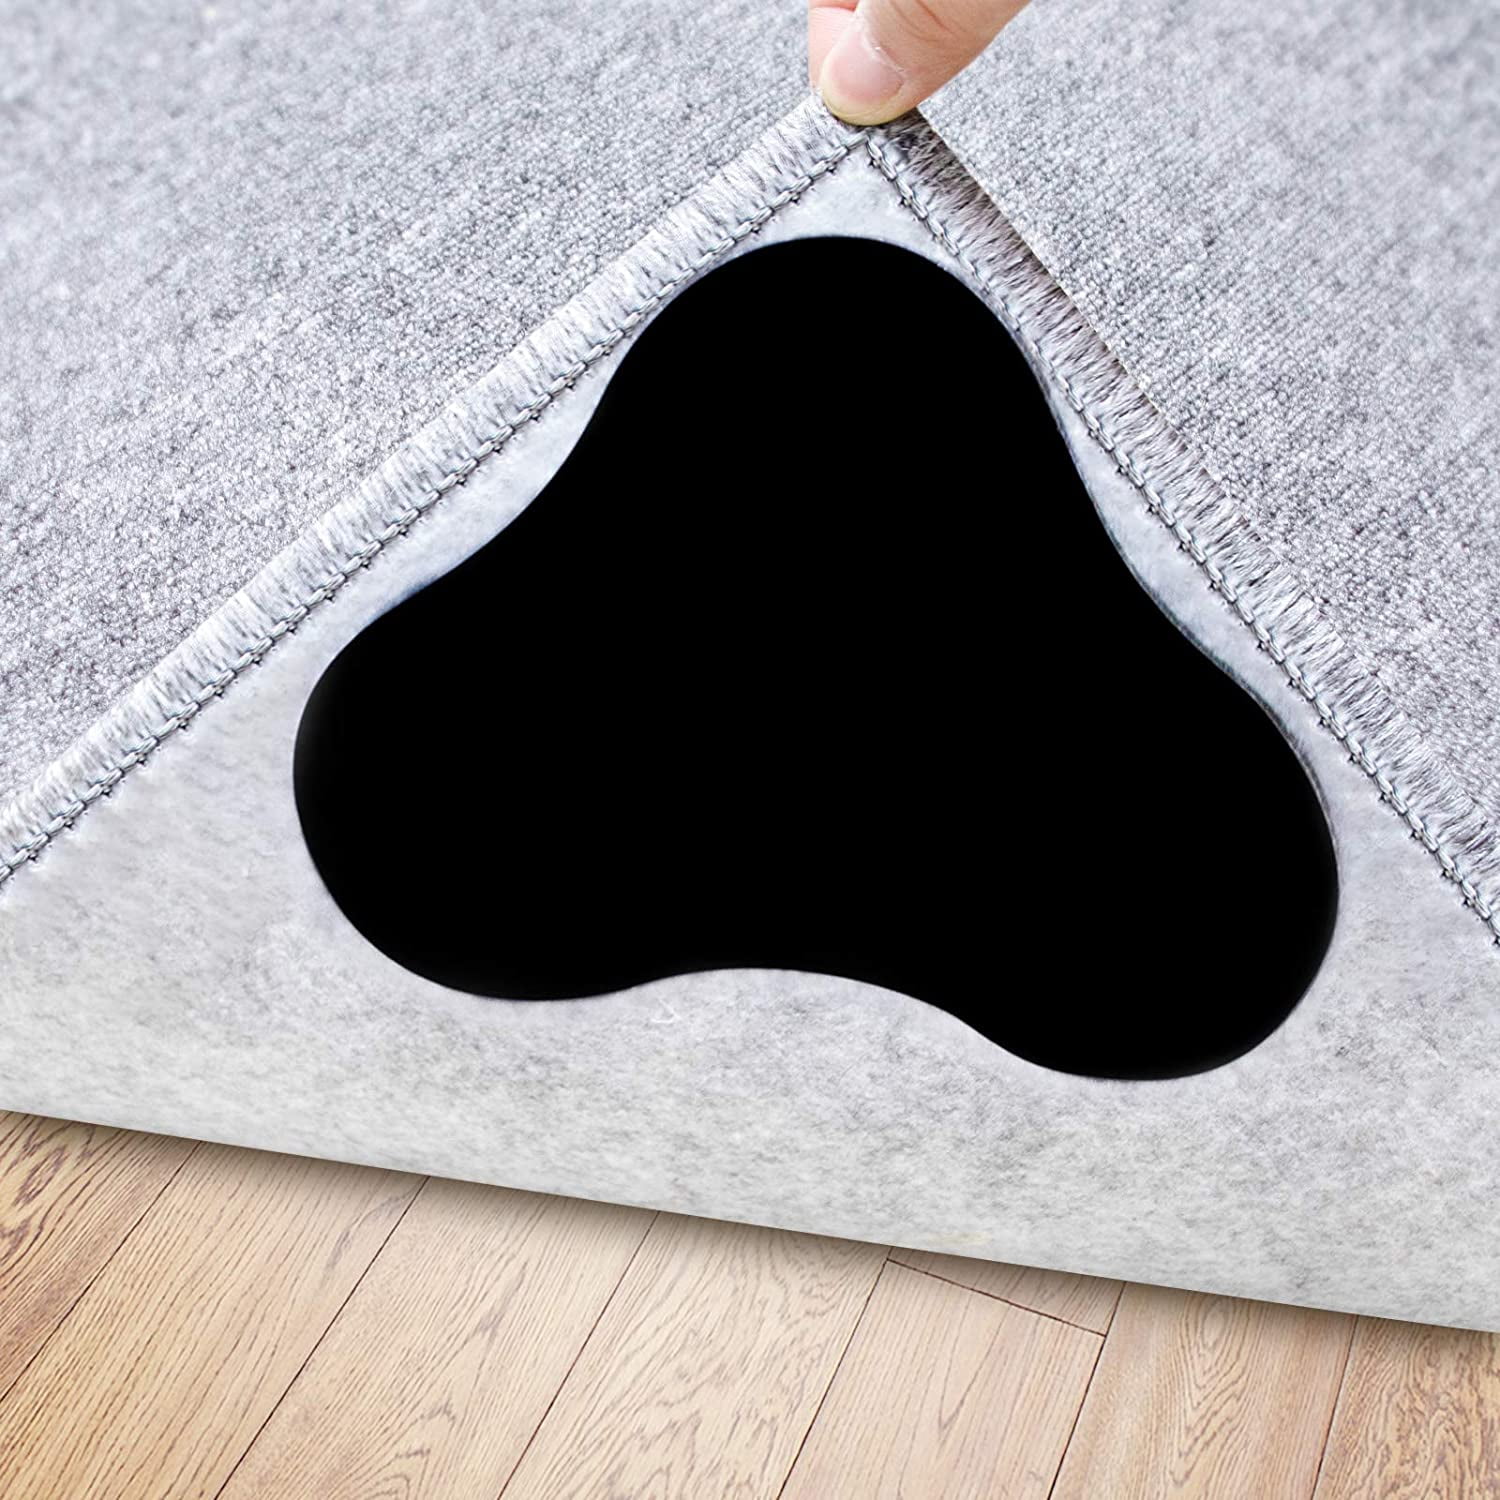 10 Pairs 2 Styles Self adhesive Anti Curling Carpet Tape Rug Gripper Secure  The Carpet Sofa and Sheets In Place and Keep The Corners Flat